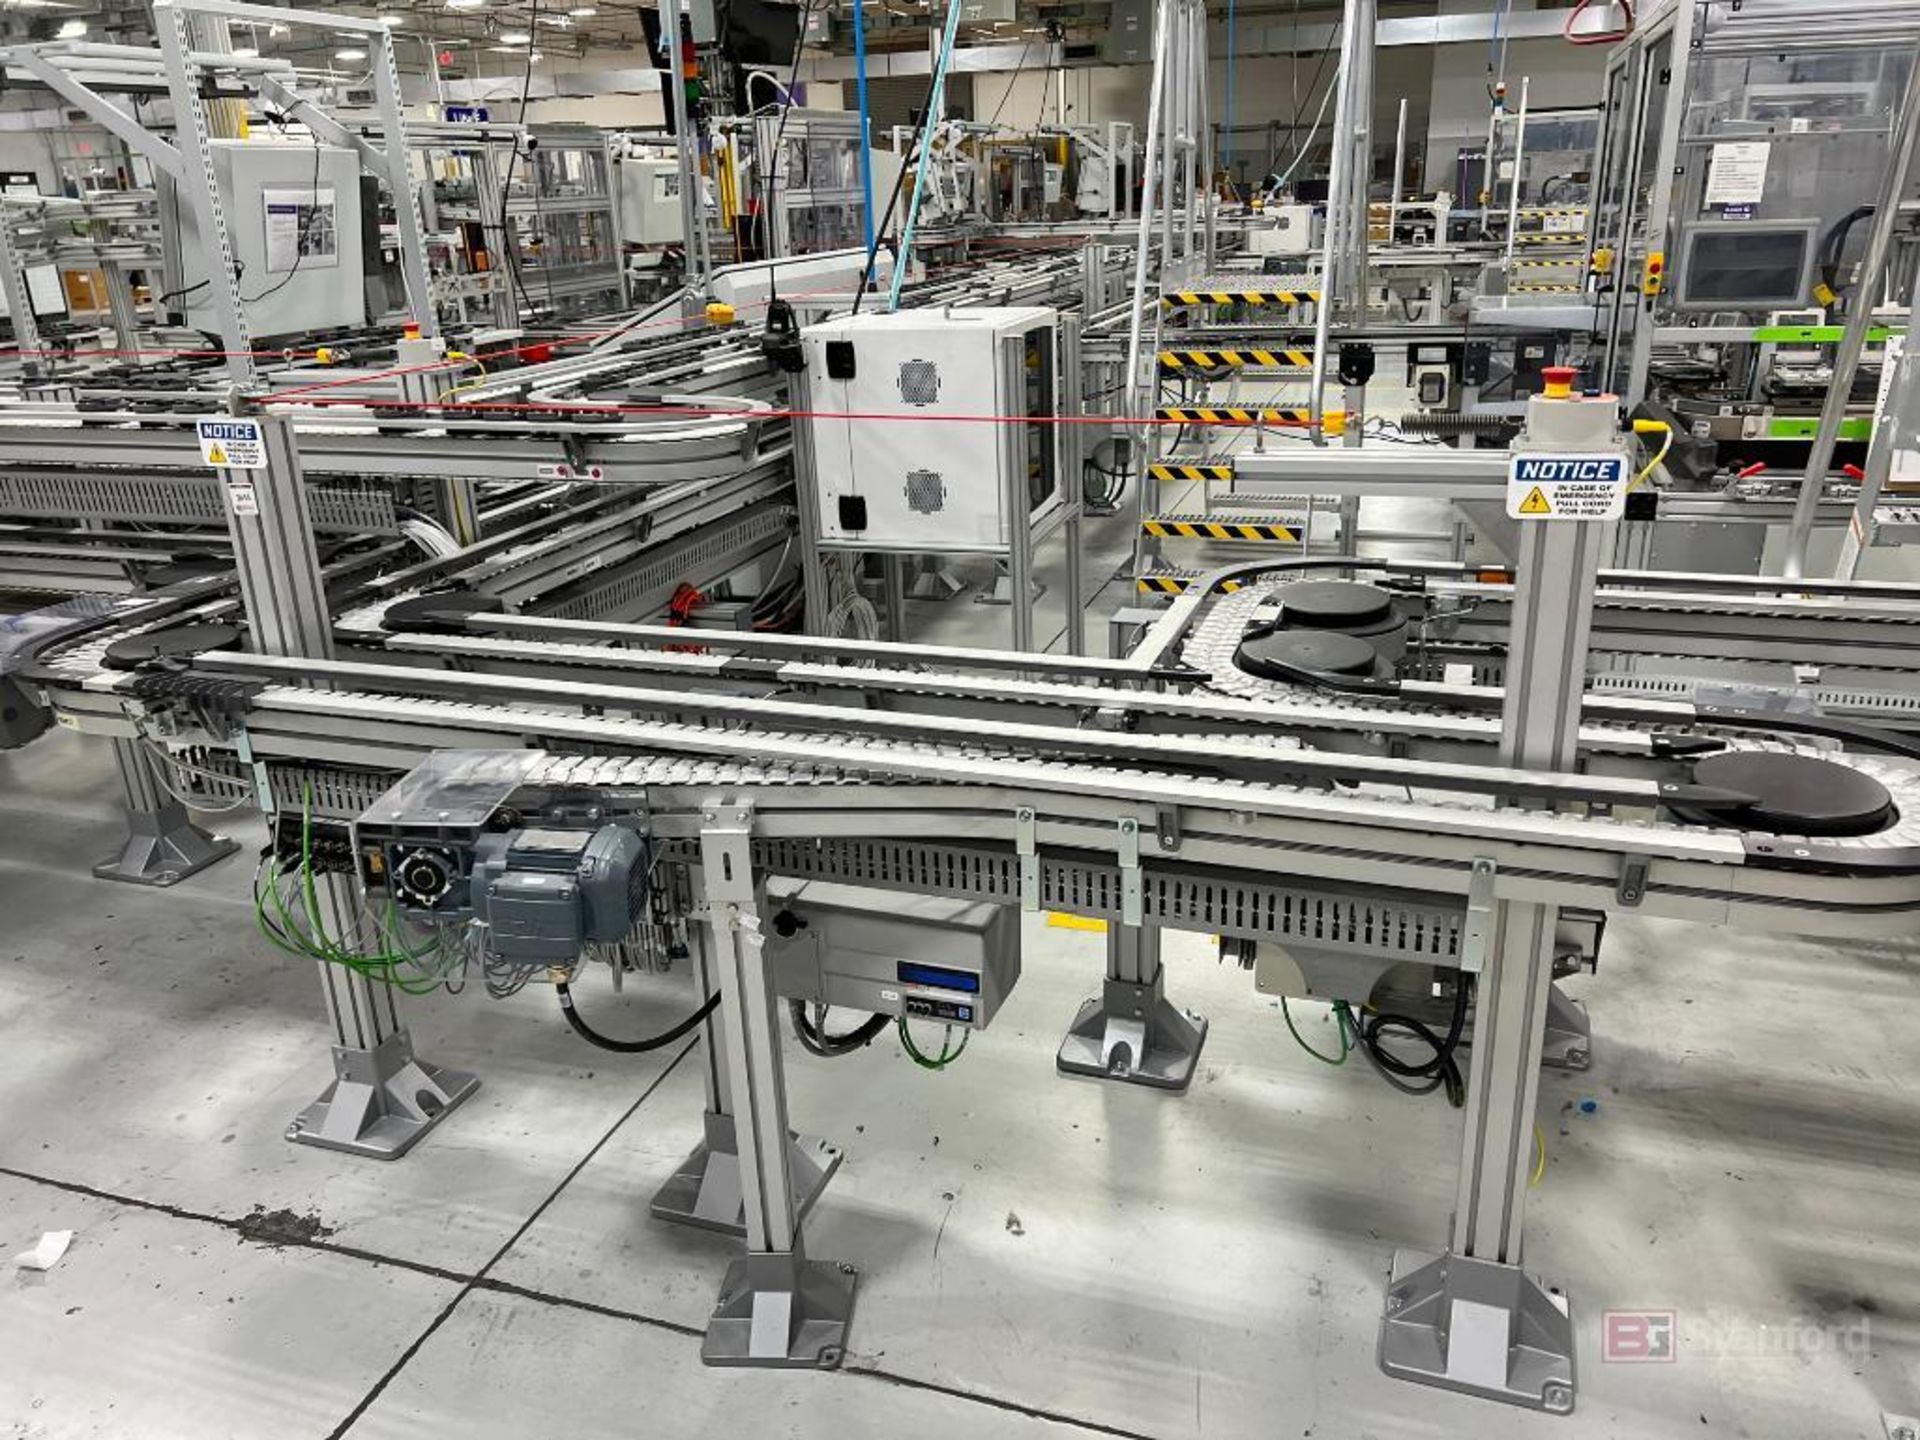 Flexlink Gen2 Multi-Layer Belt Conveyor System with DRO main control - Image 14 of 18